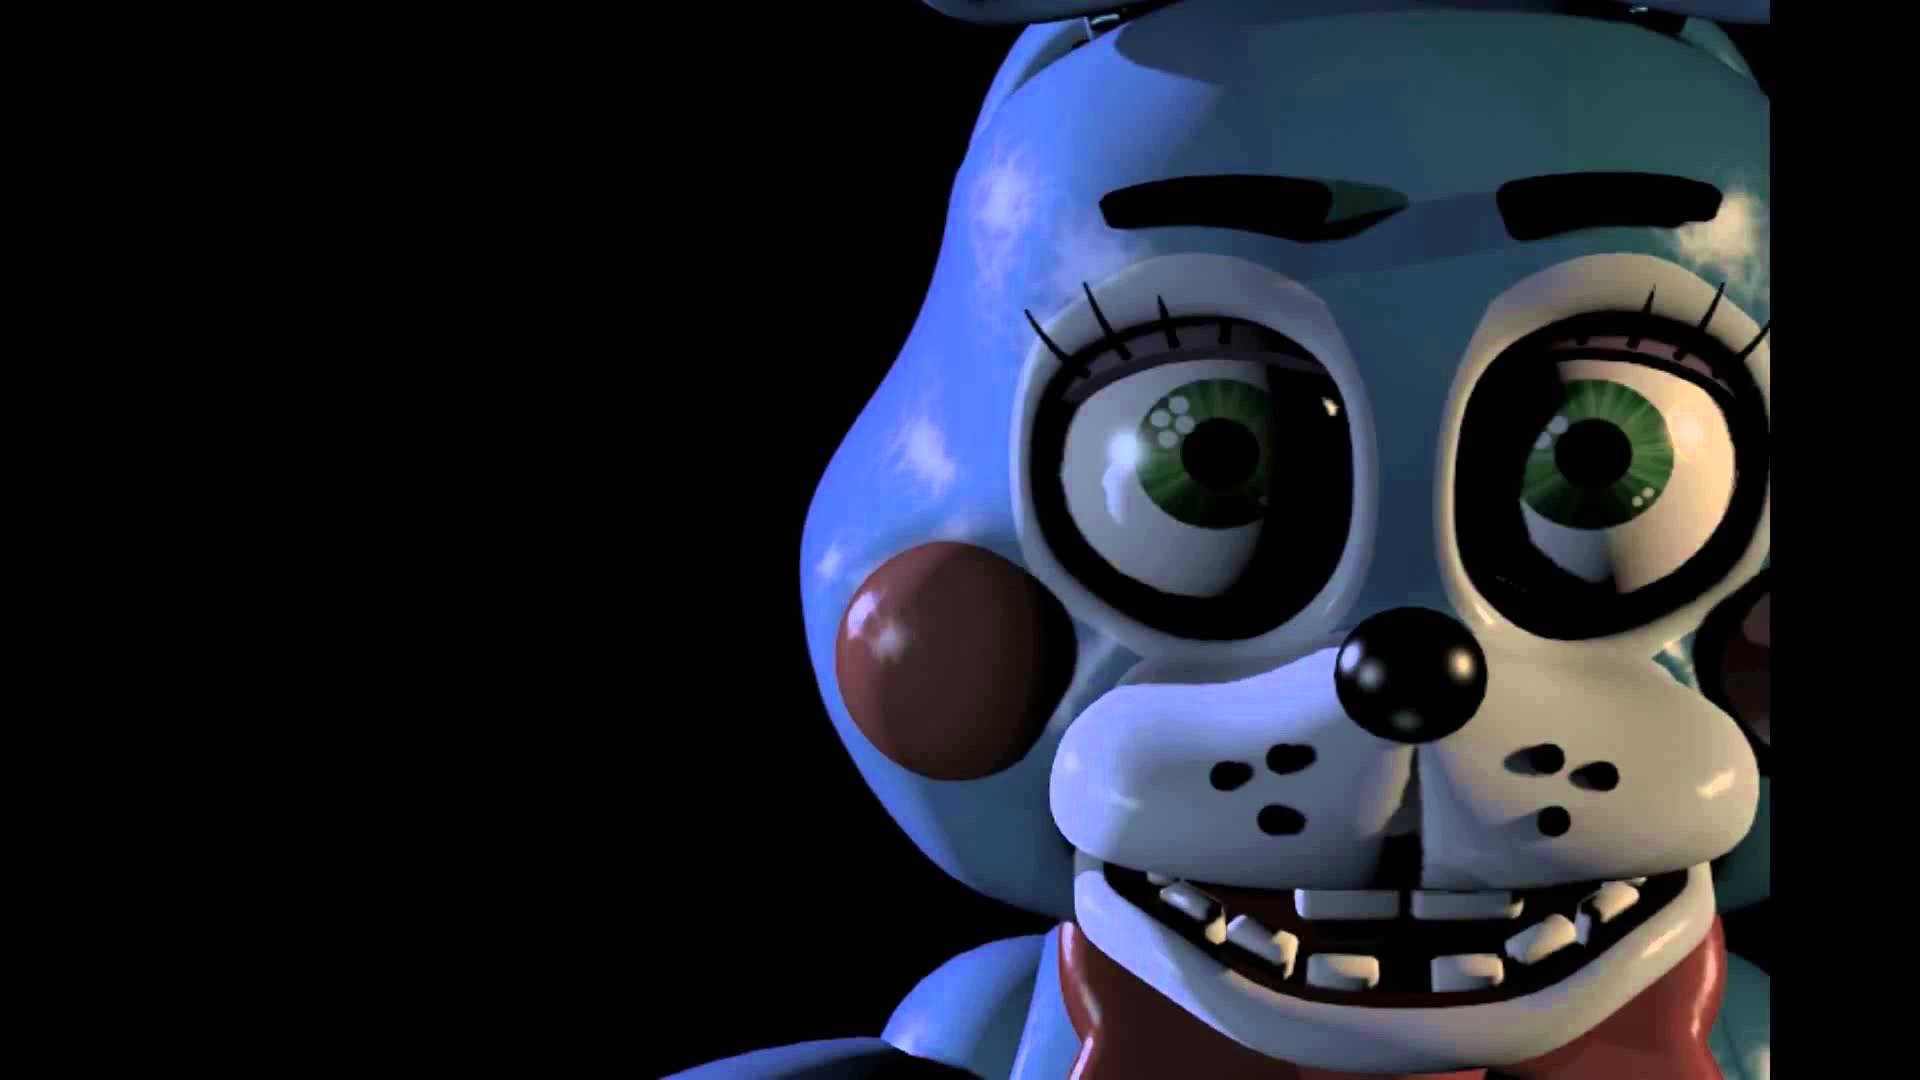 General 1920x1080 Five Nights at Freddy's animals video games PC gaming